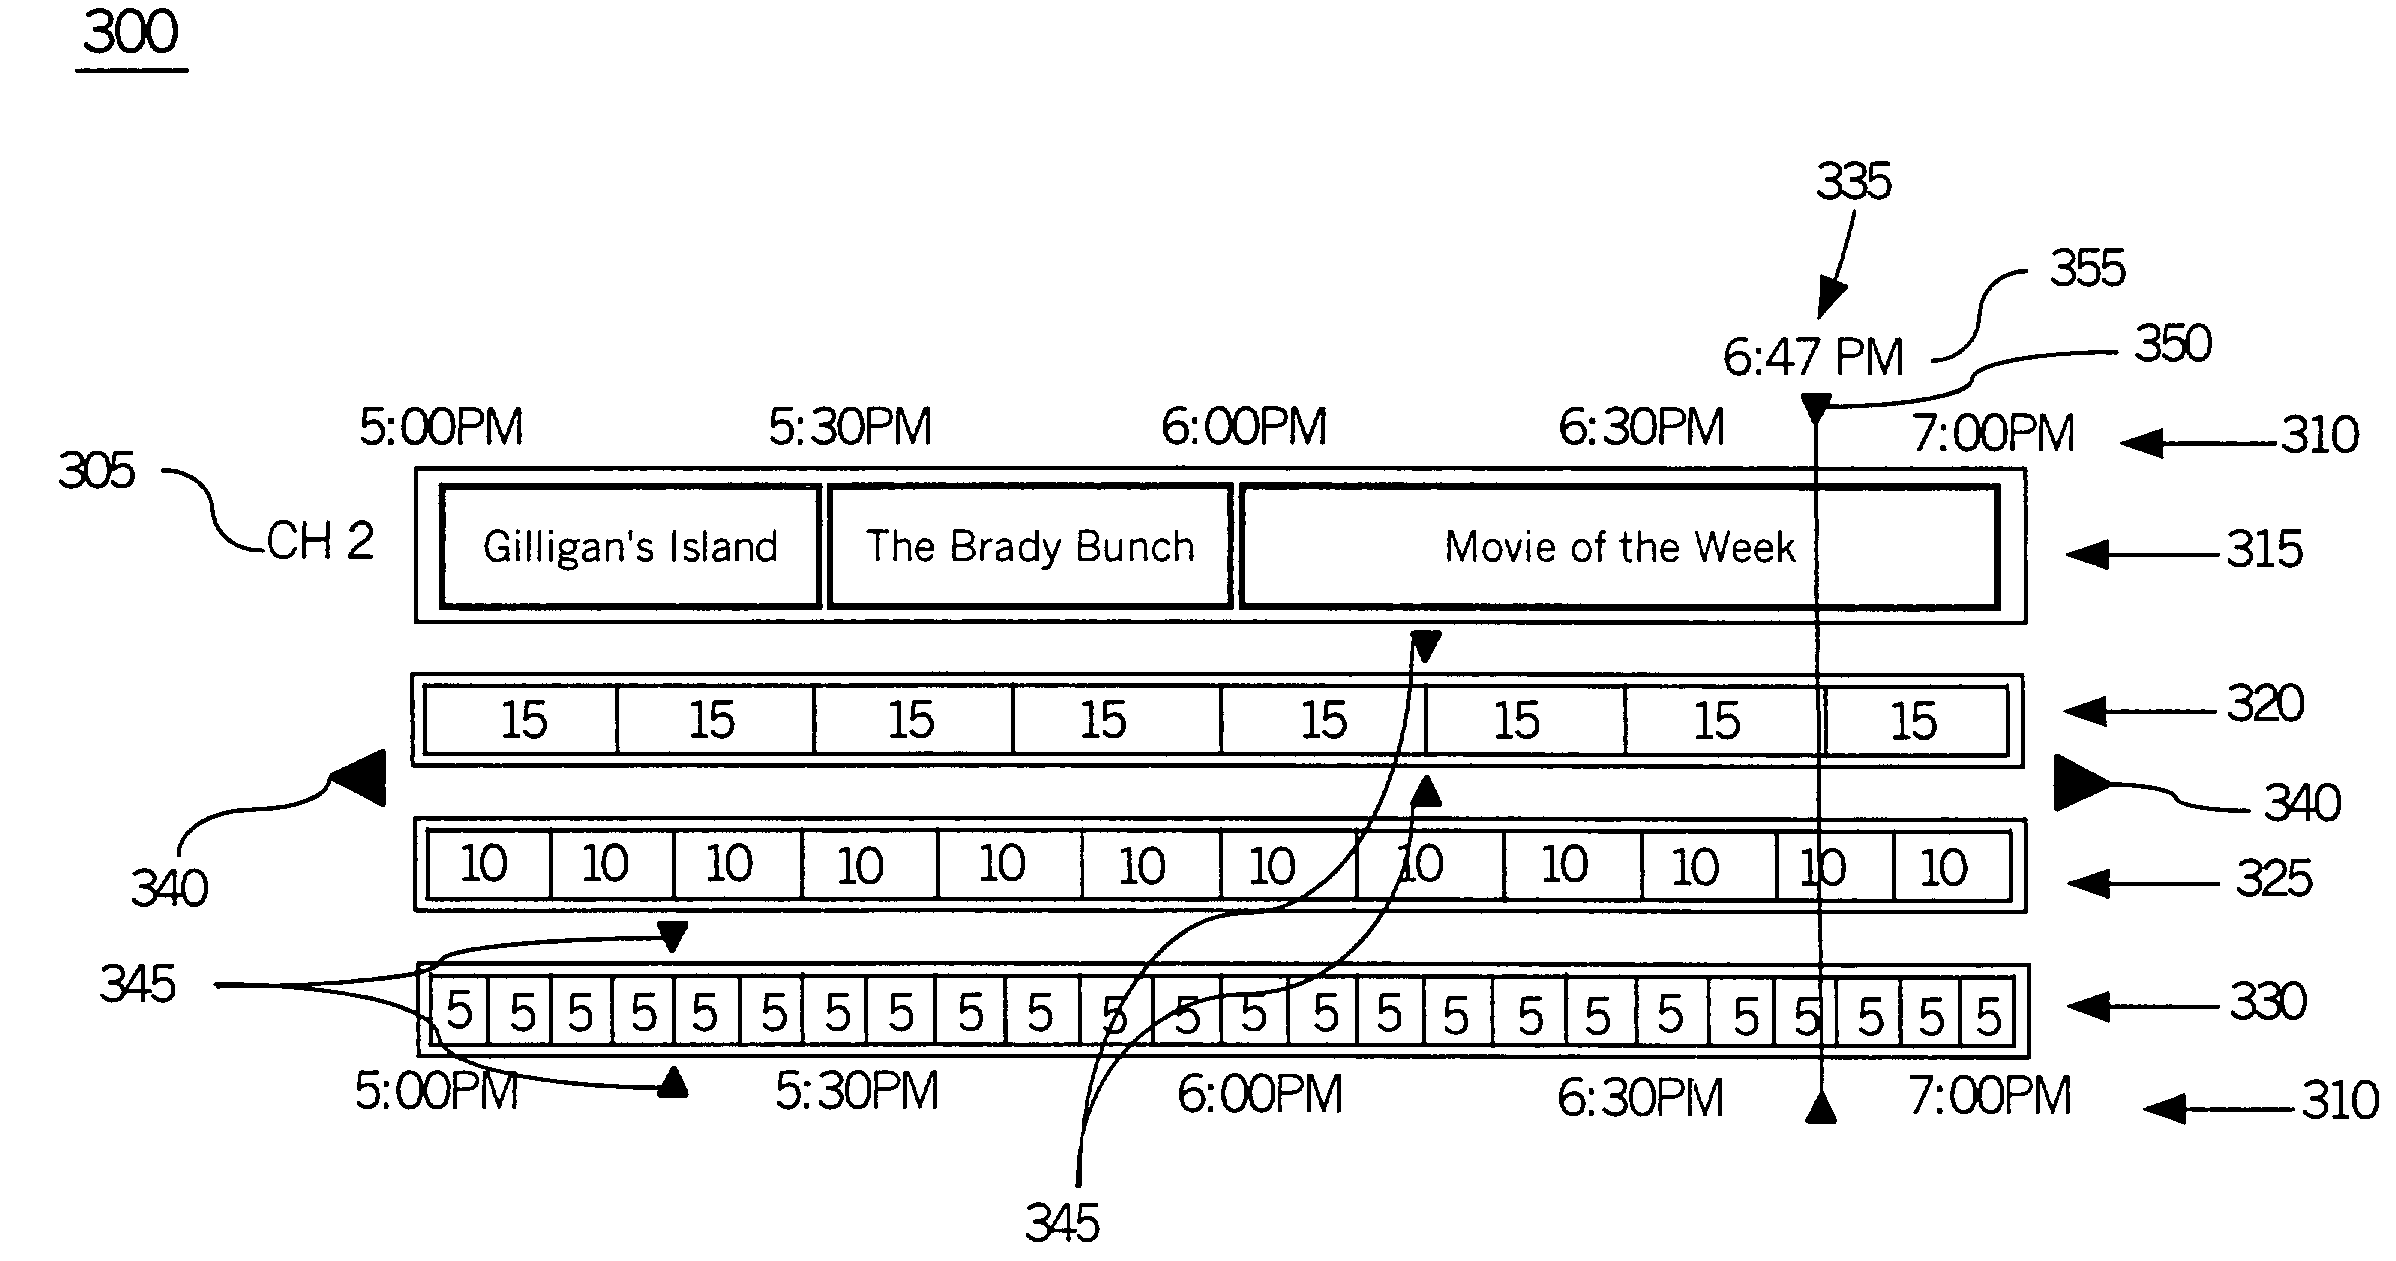 Navigating to a particular program or specific time increment in a personal video recorder